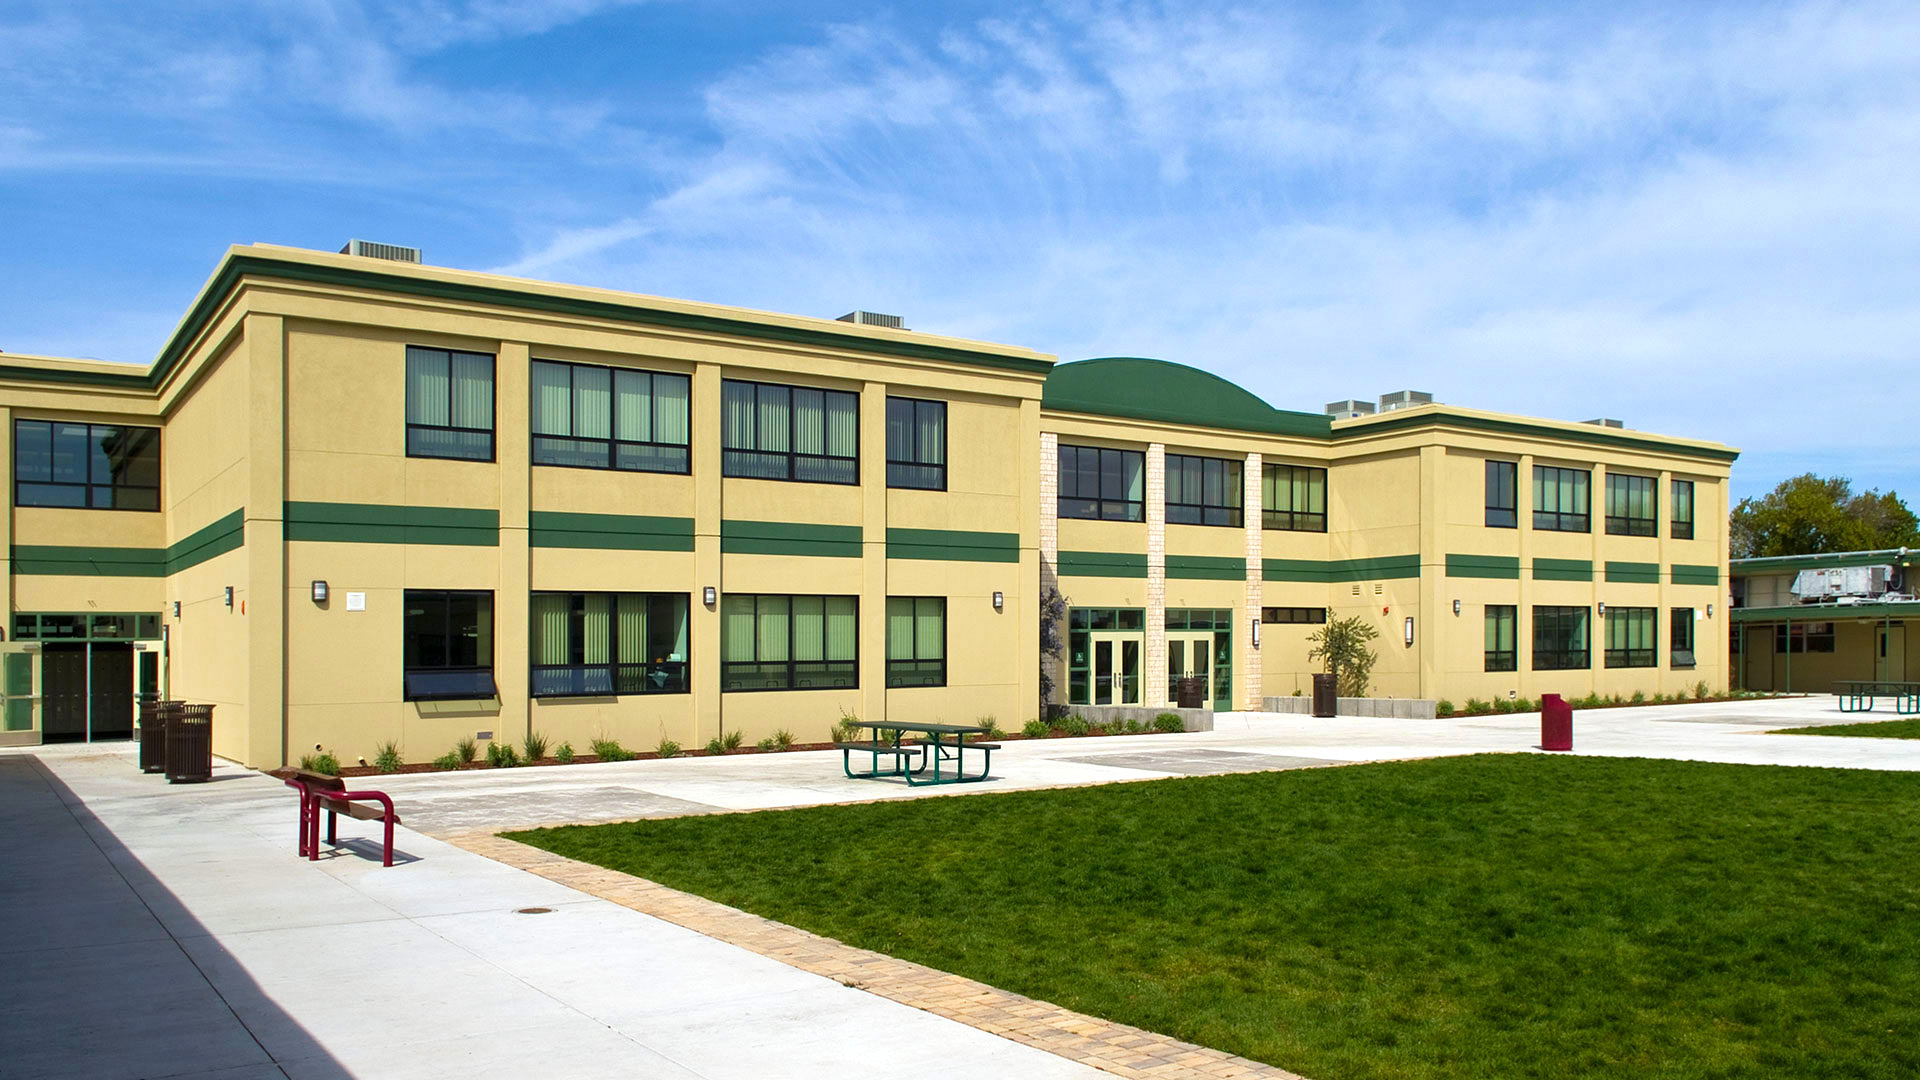 Two story modular classroom wing with beige walls and green details, and grass field in front.